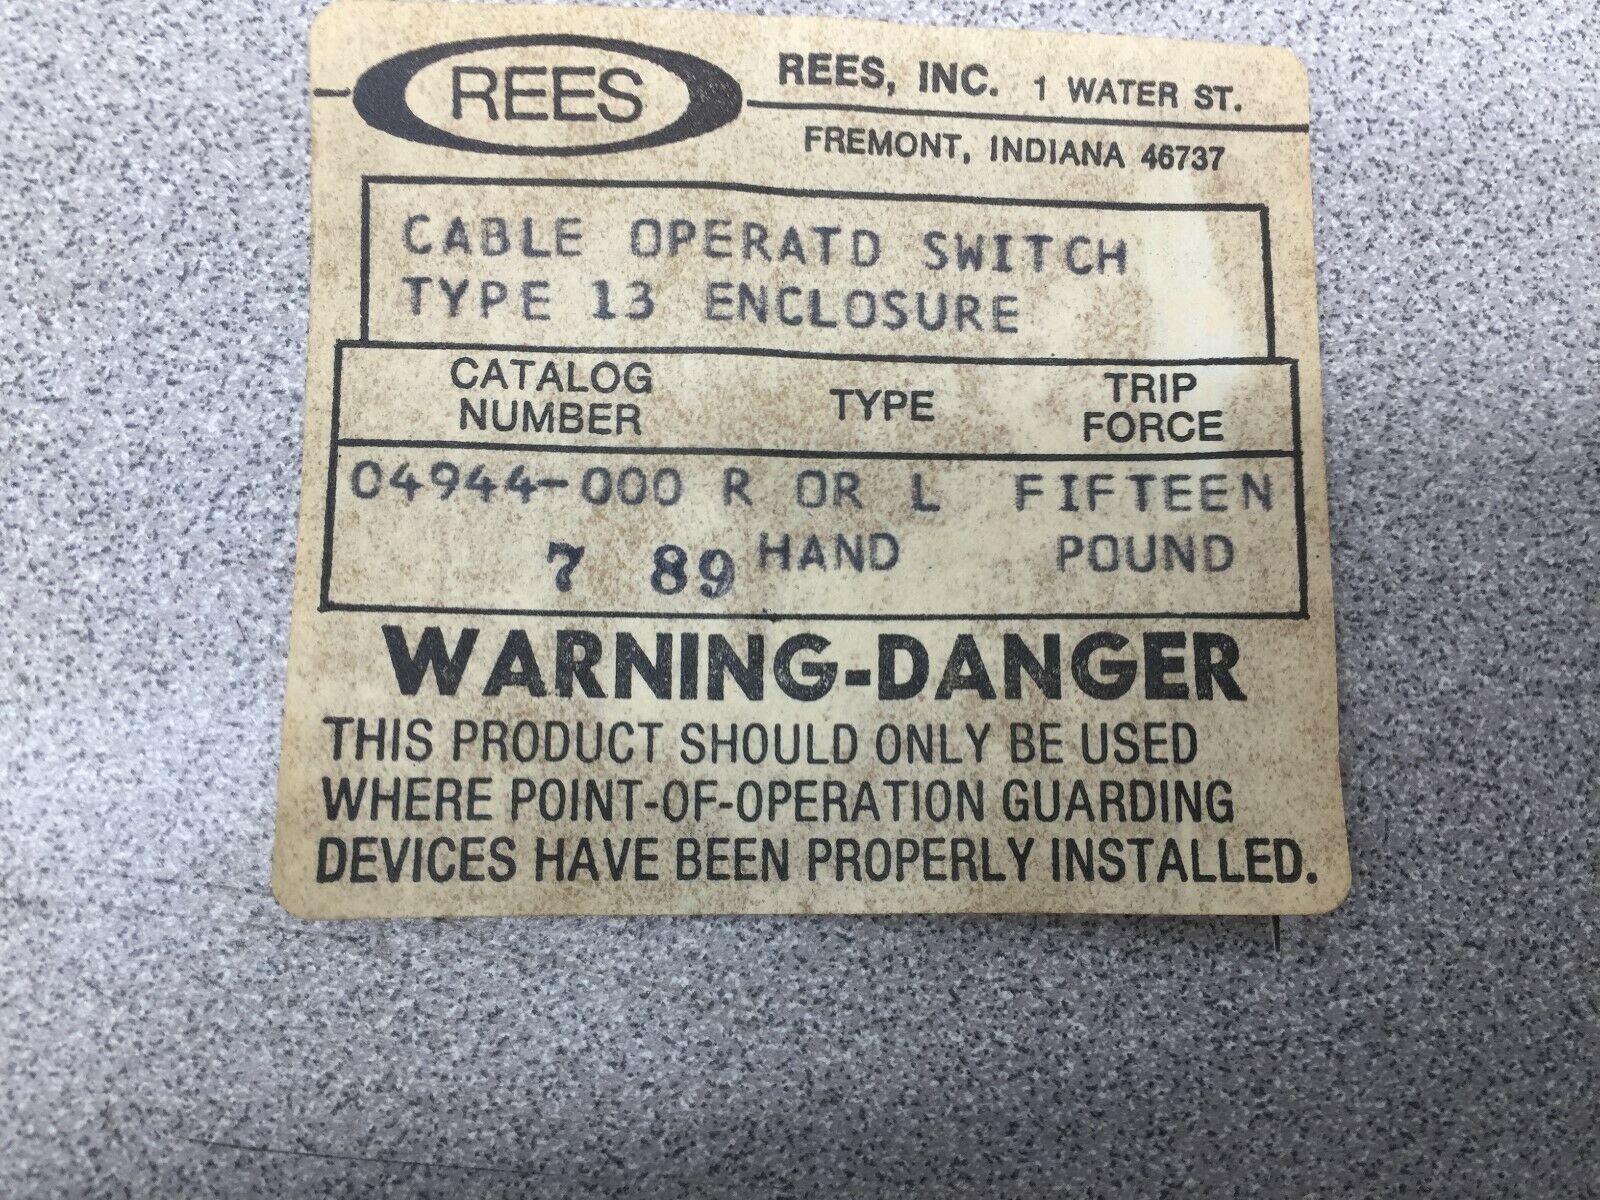 USED REES CABLE OPERATED SWITCH 15# TRIP FORCE RIGHT OR LEFT HAND  04944-000